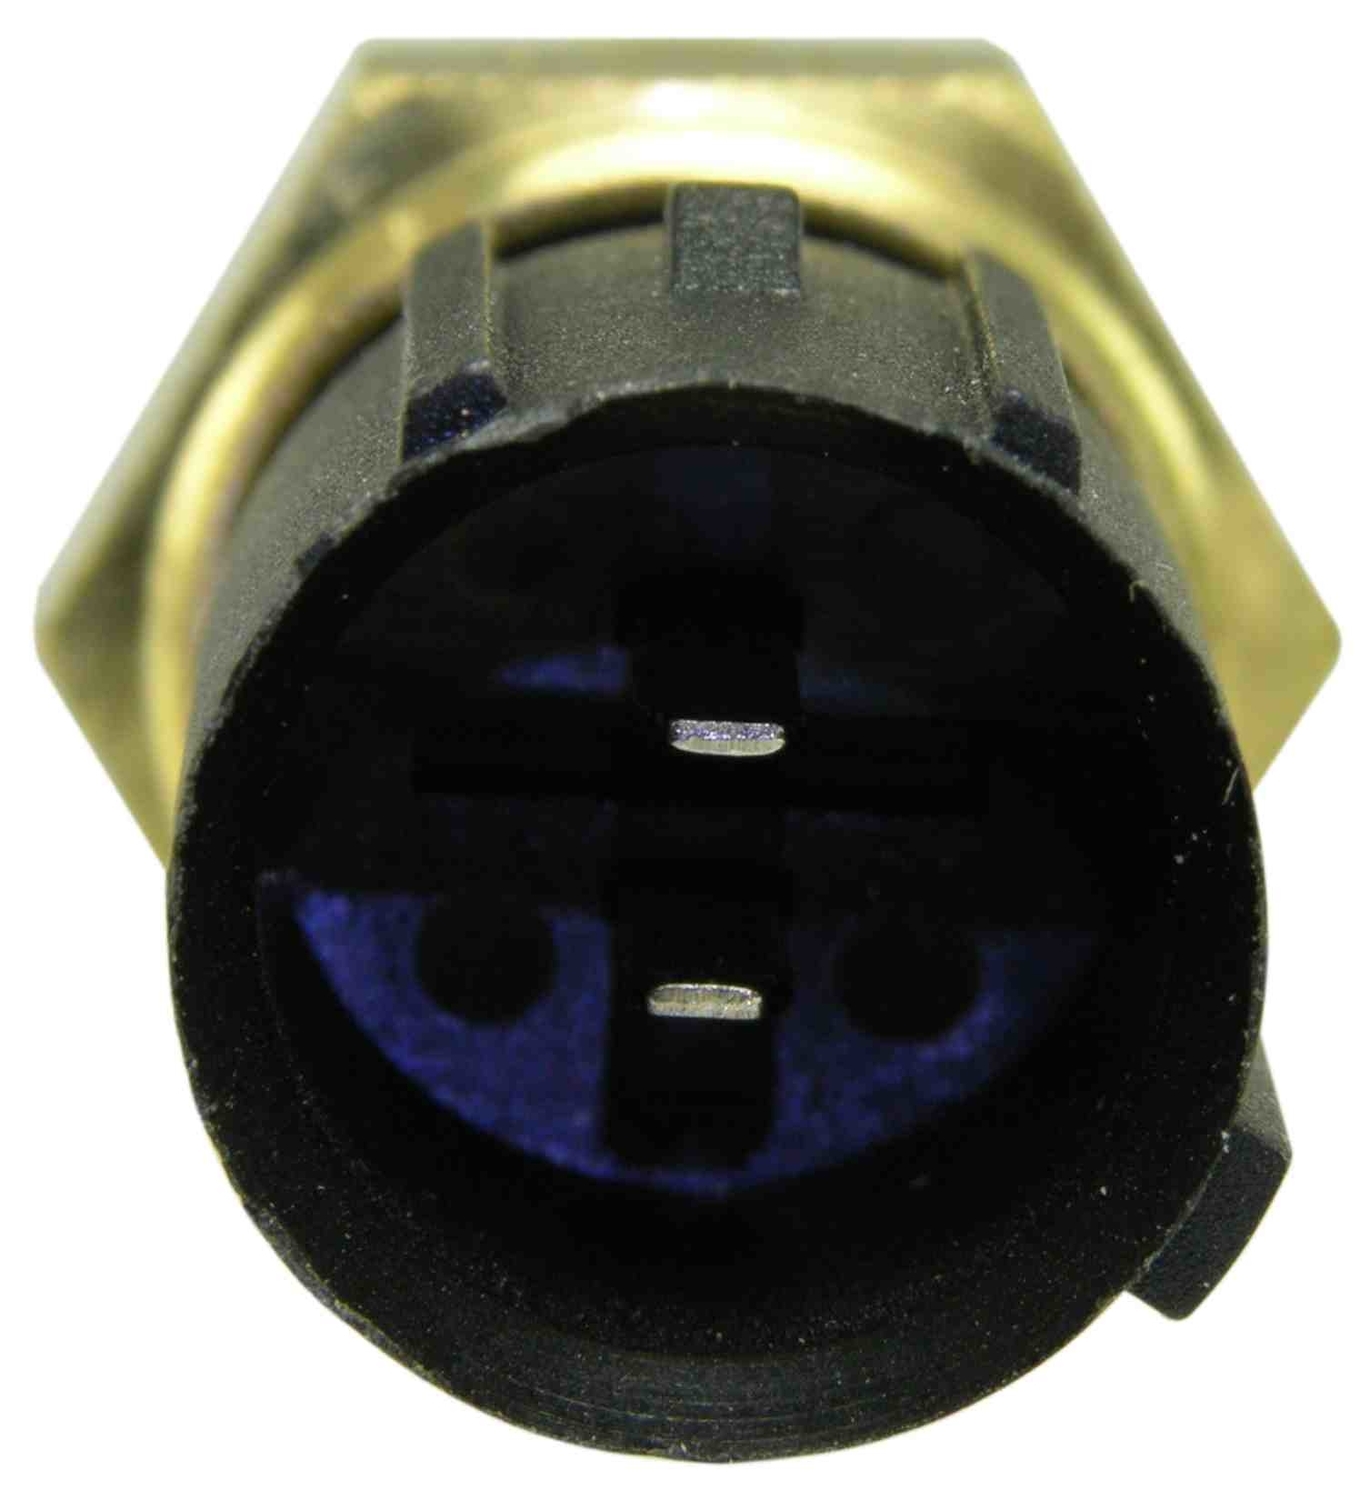 Ambient Air Temperature Sensor NGK AN0071 fits 15-16 Ford Mustang